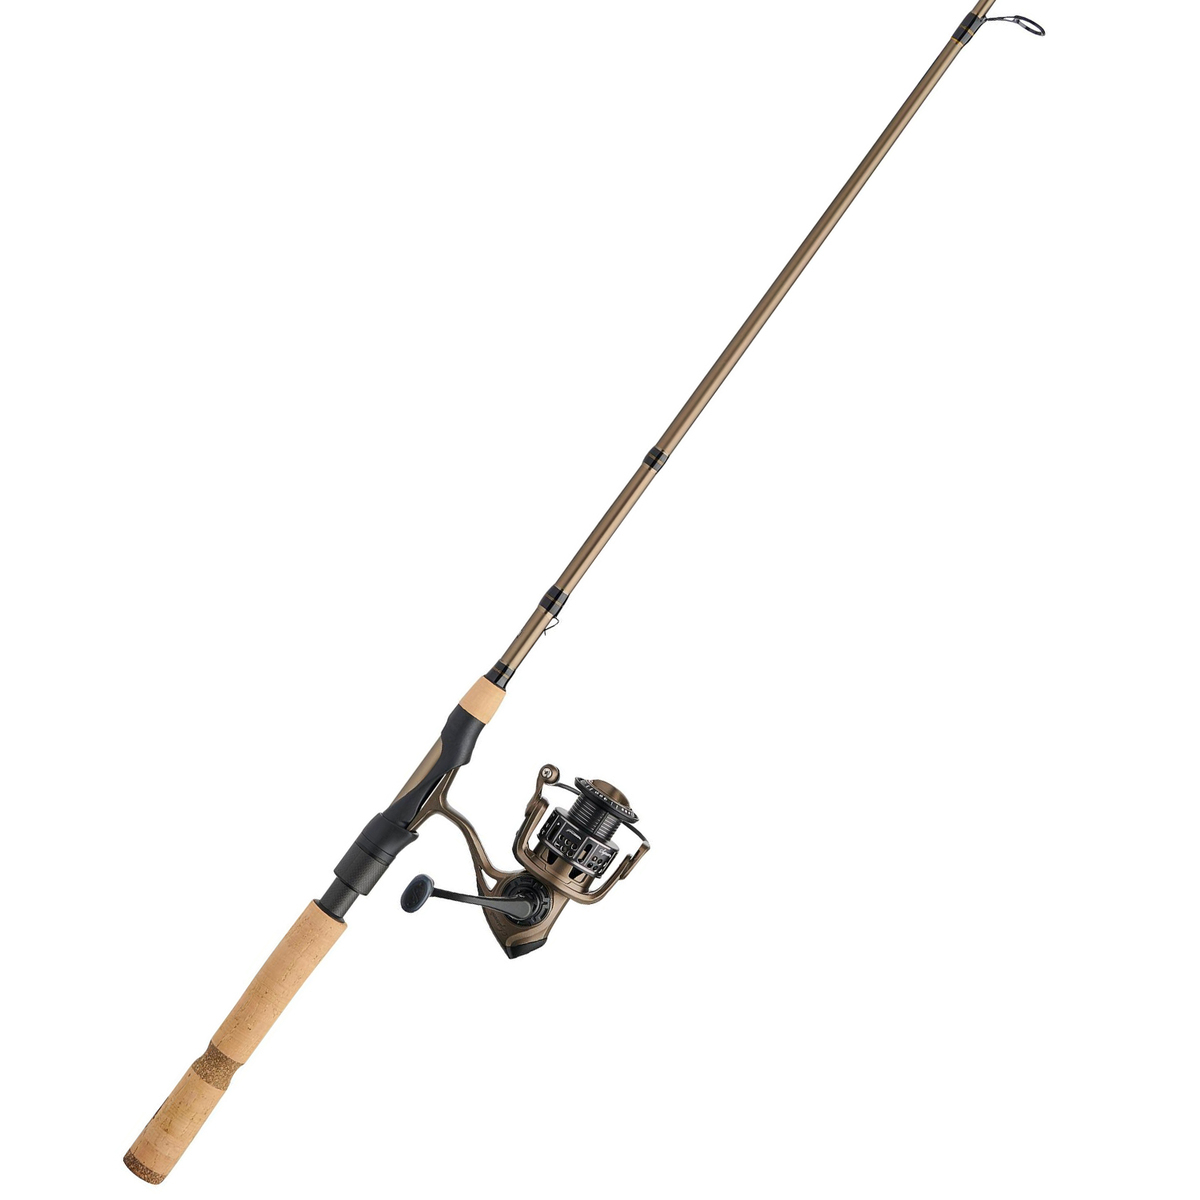  Shakespeare Alpha Medium 6' Low Profile Fishing Rod and Bait  Cast Reel Combo (2 Piece),Black, White : Sports & Outdoors